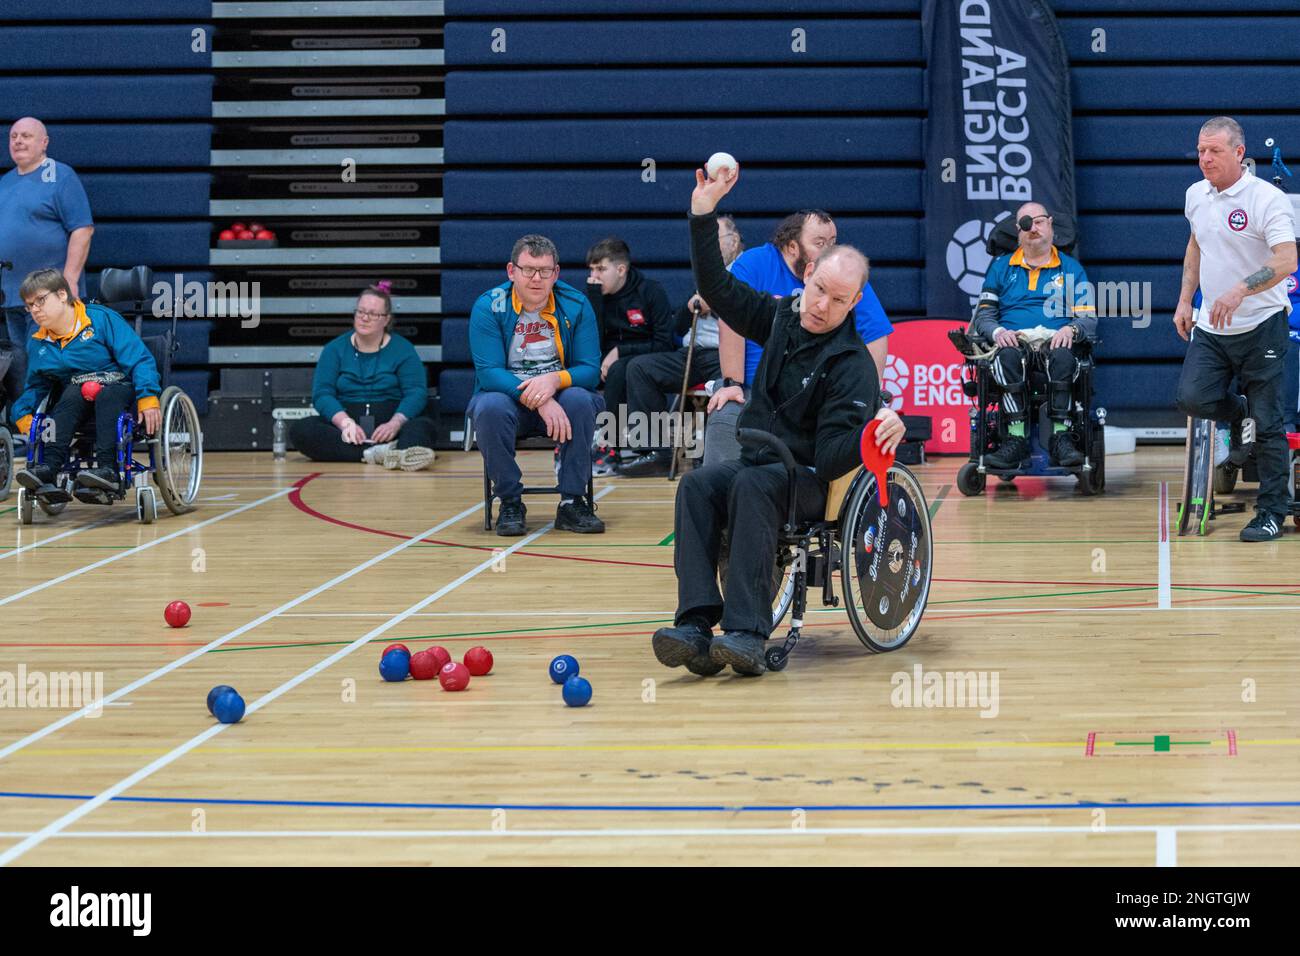 Brentwood Essex 19th Feb 2023 Boccia England Super league fixture at Brentwood Essex. Boccia is a Paralympic sport. It's a target ball sport which tests both muscle control and accuracy. From a seated position (and therefore ideal for wheelchair users) players propel balls to land close to a white marker ball - the jack. If a player is unable to grasp and propel a ball a ramp can be used. The Super League consists of the top eight Pan Disability teams in the country. Teams earn a place in this league through promotion from the National League. There are four fixture days which take place b Stock Photo